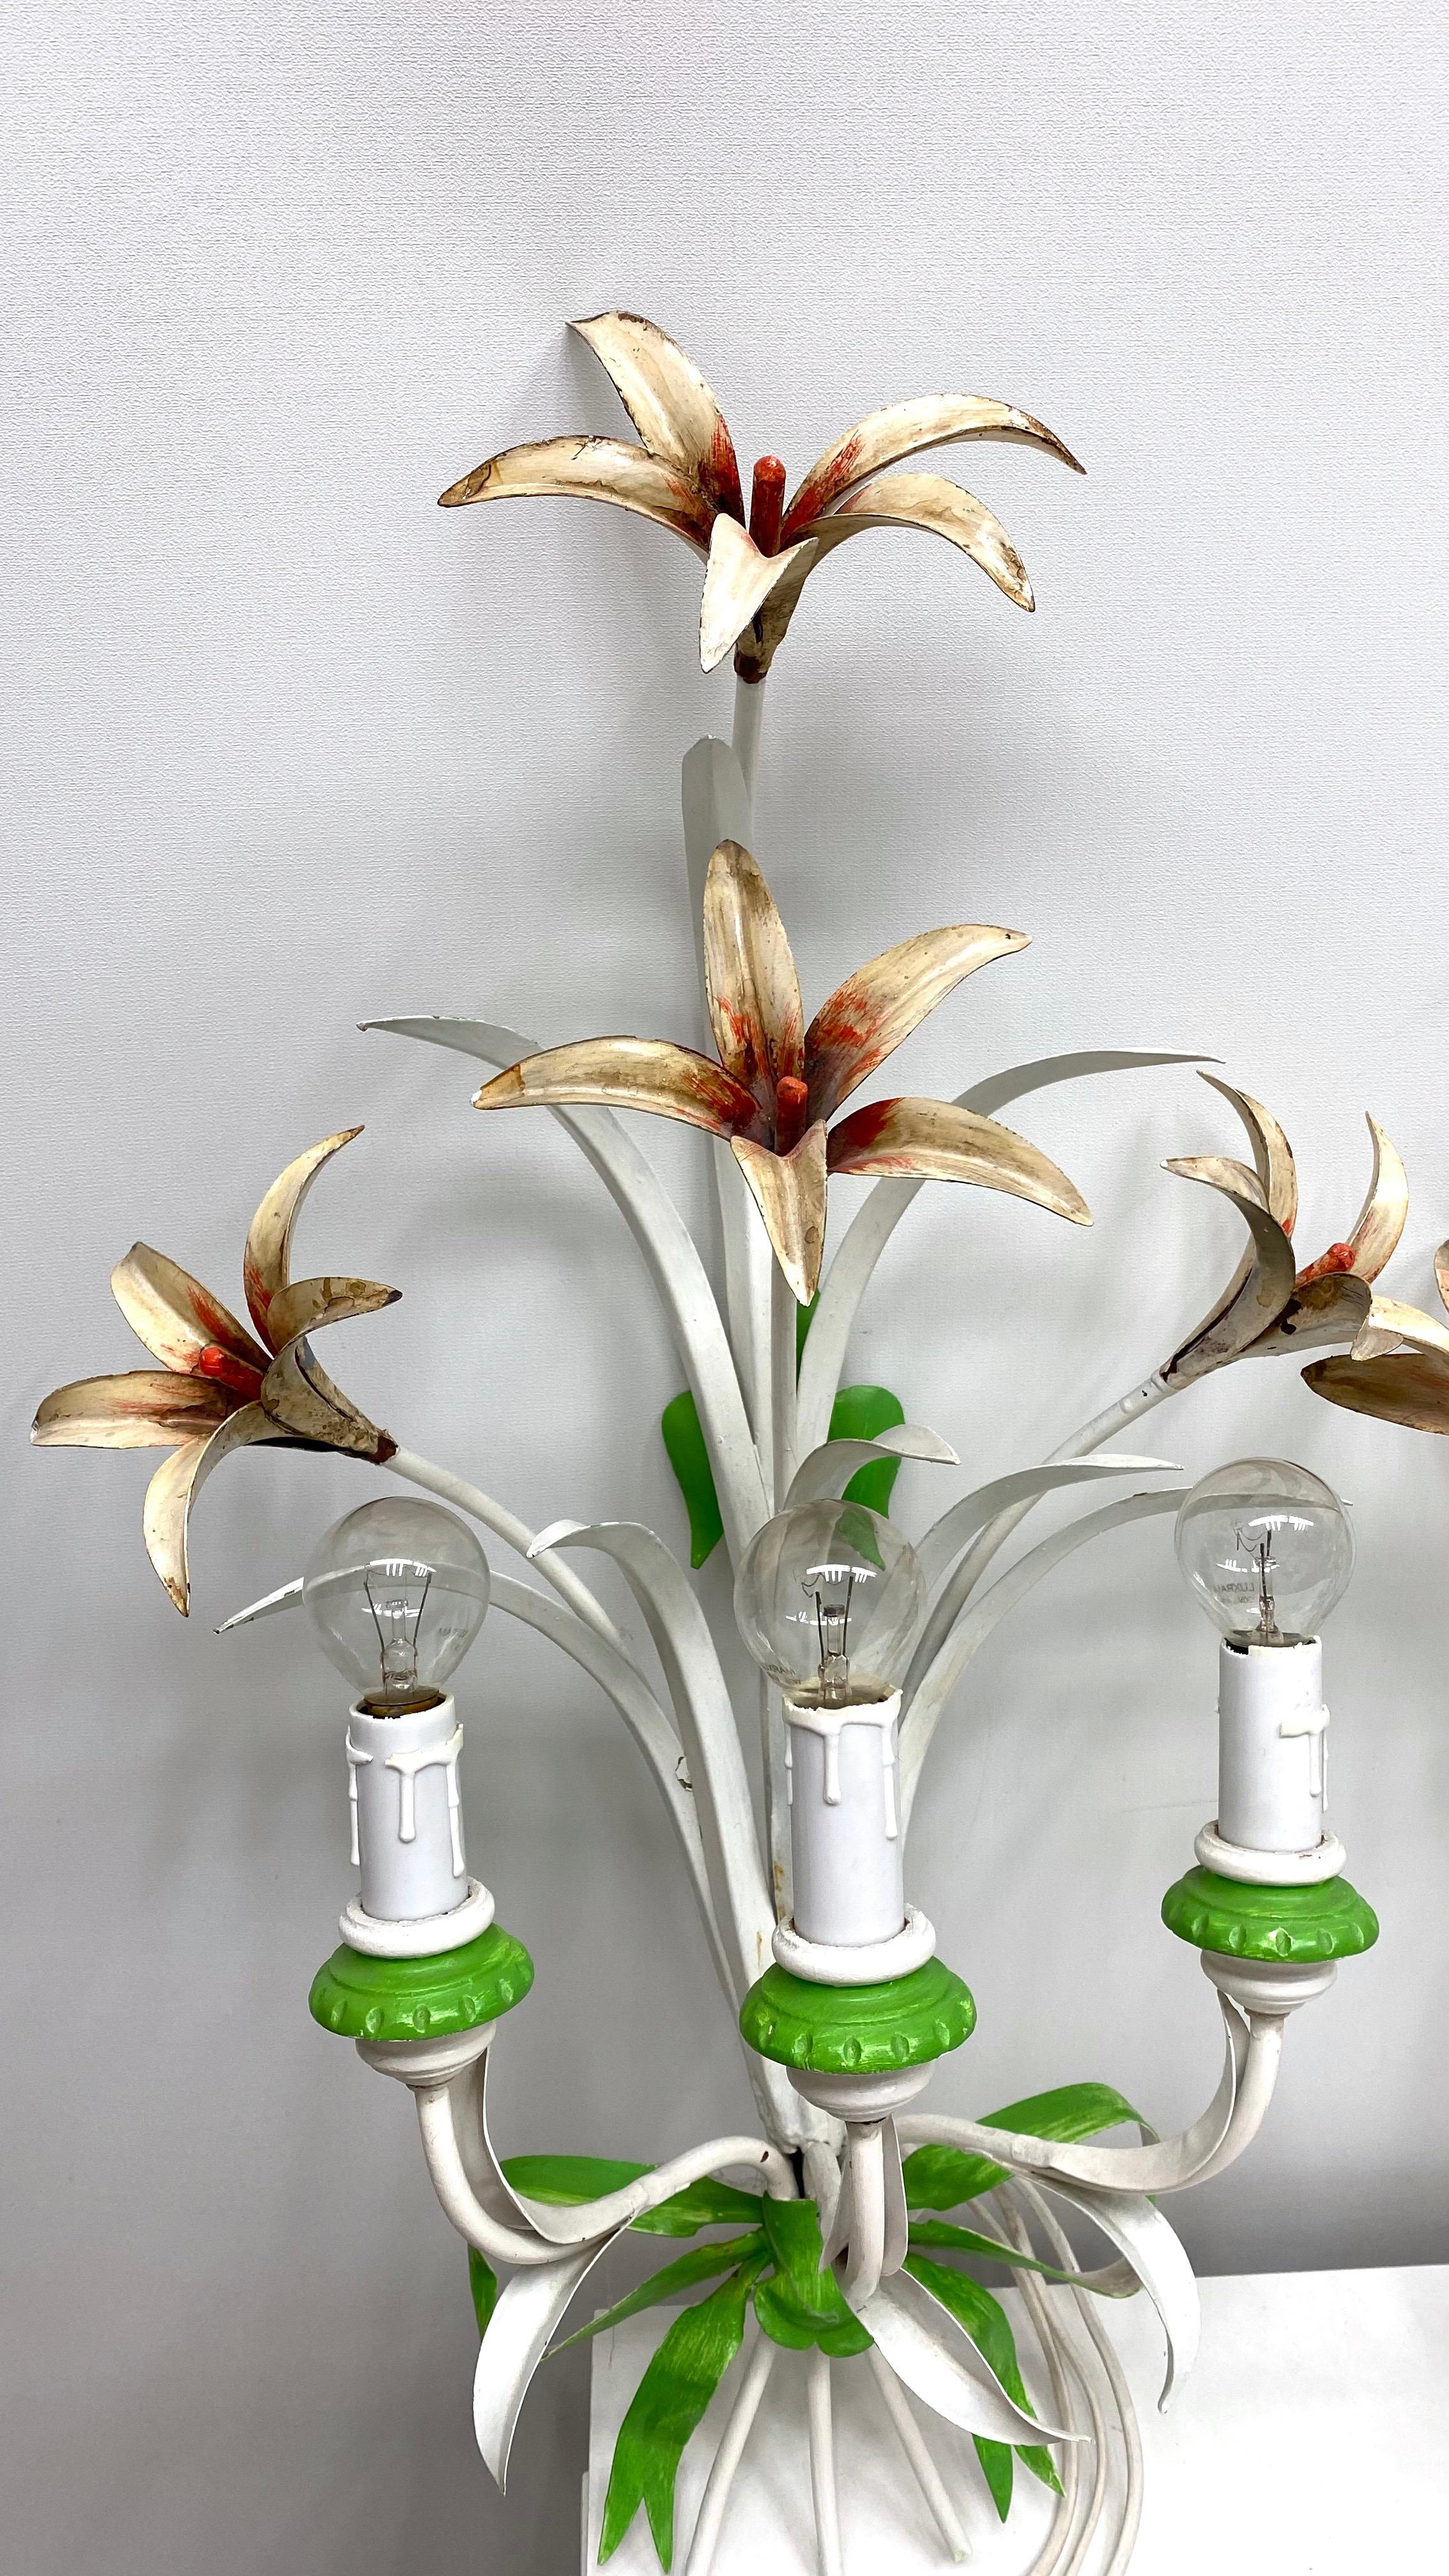 Set of Three Shabby Chic Flower Leaf Tole Sconces Polychrome Metal, 1960s, Italy For Sale 1